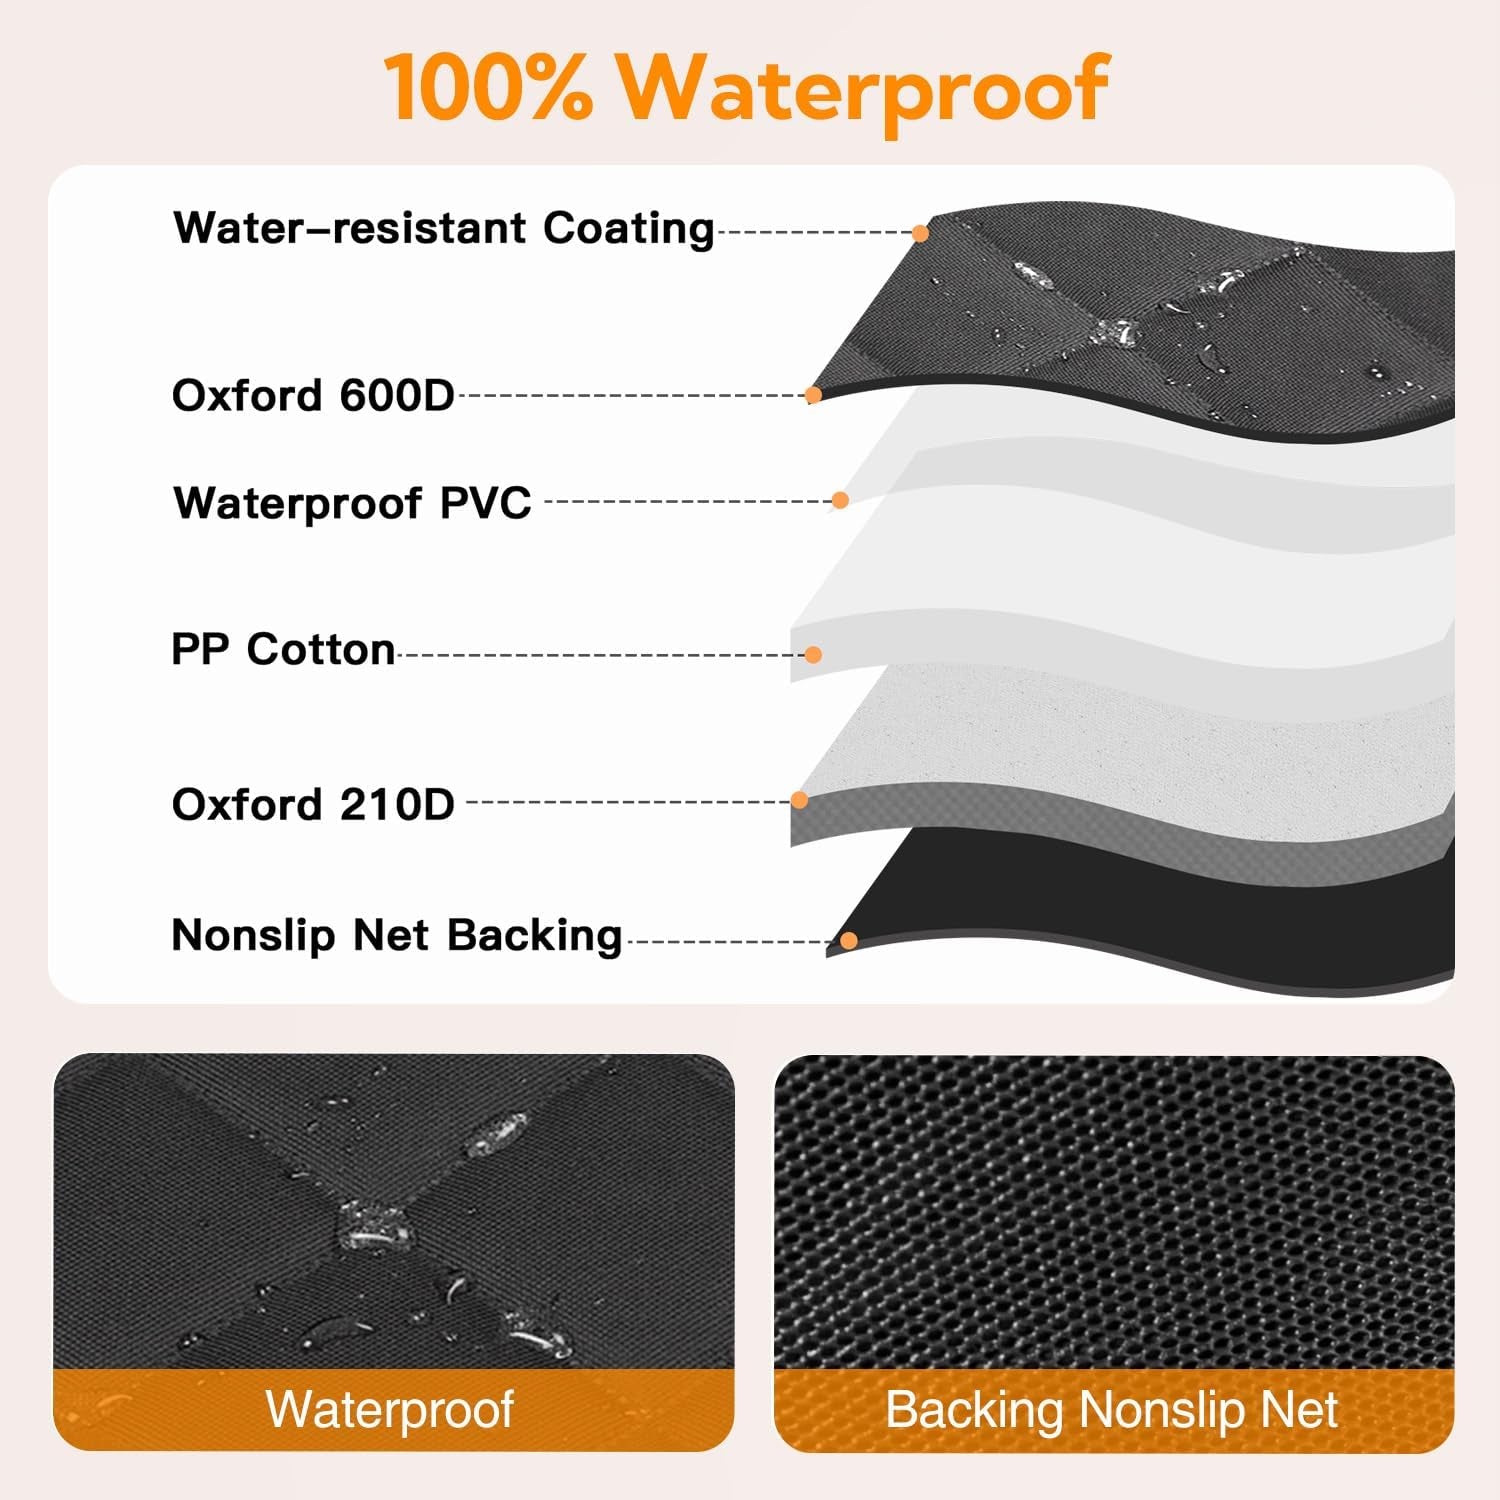 Dog Car Seat Cover for Back Seat,Waterproof Hammock with Mesh Window, Anti-Scratch Nonslip Car Seat Protector for Dogs, 600D Heavy Duty Dog Seat Cover for Cars Trucks and Suvs